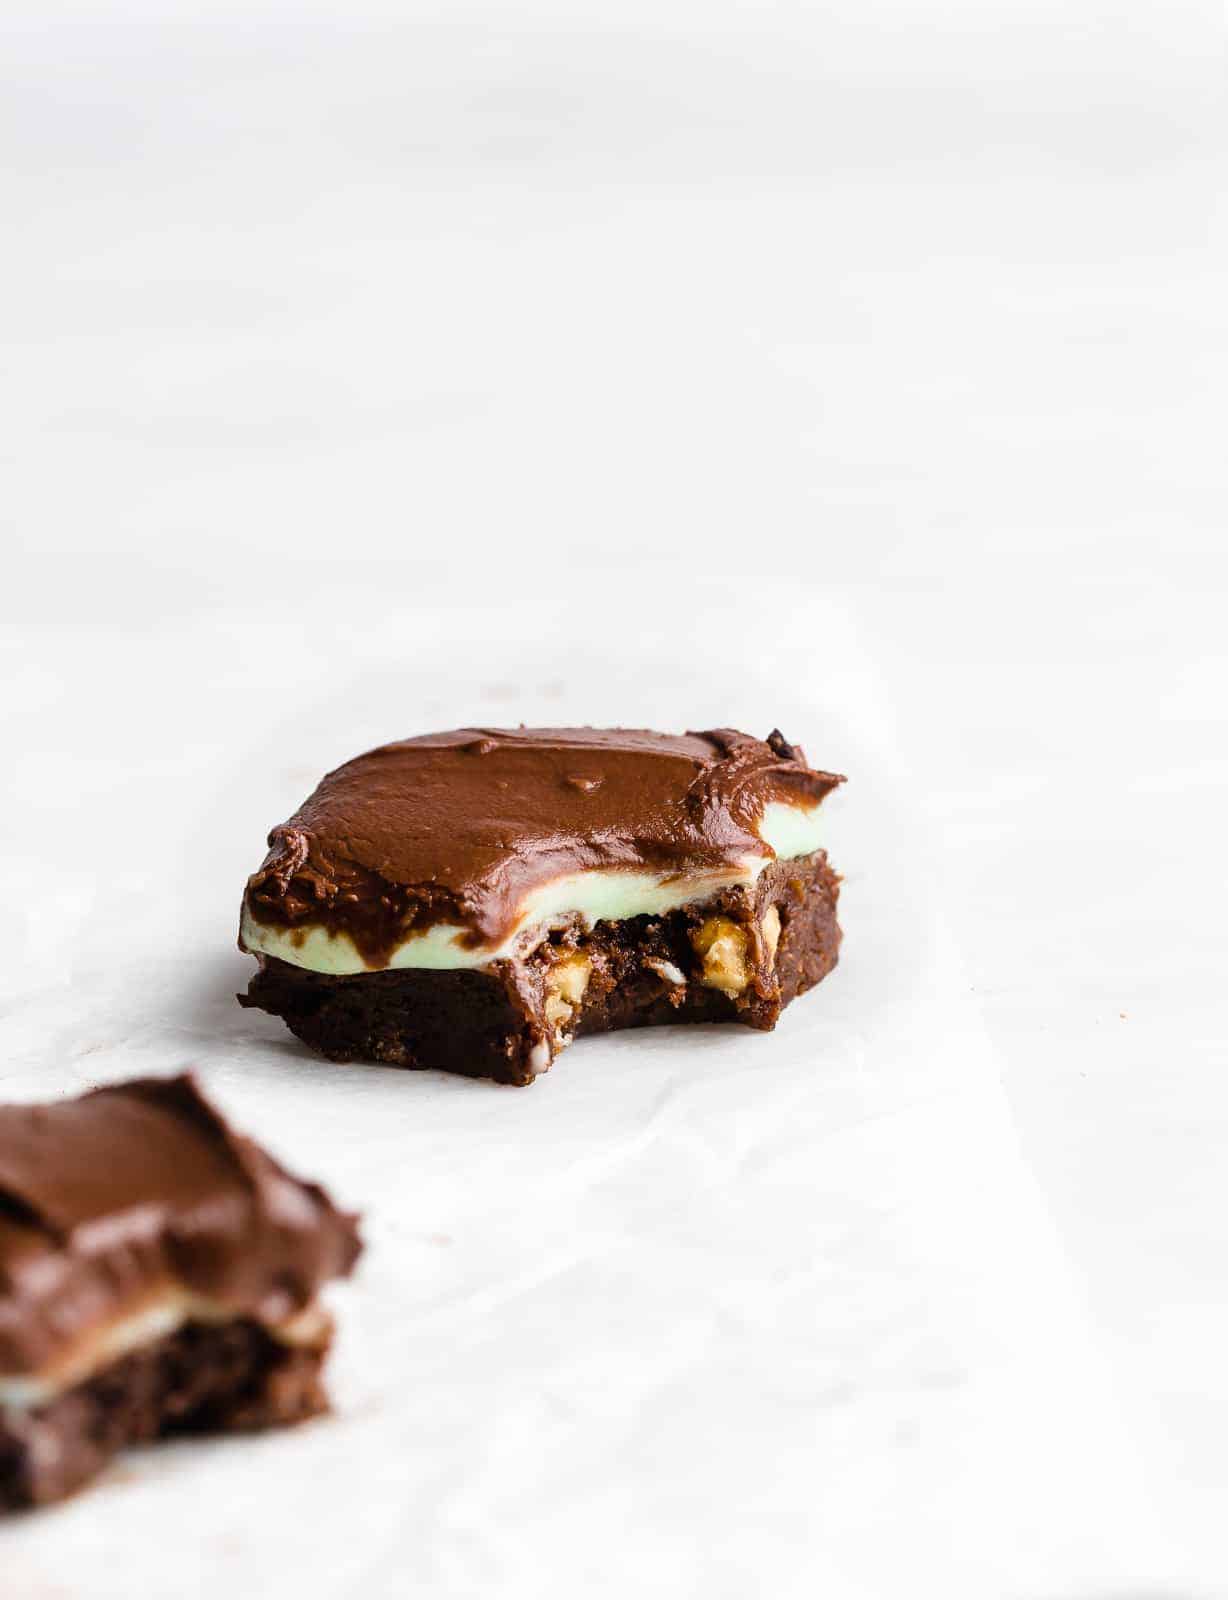 A mint and chocolate frosting covered brownie on a white background.